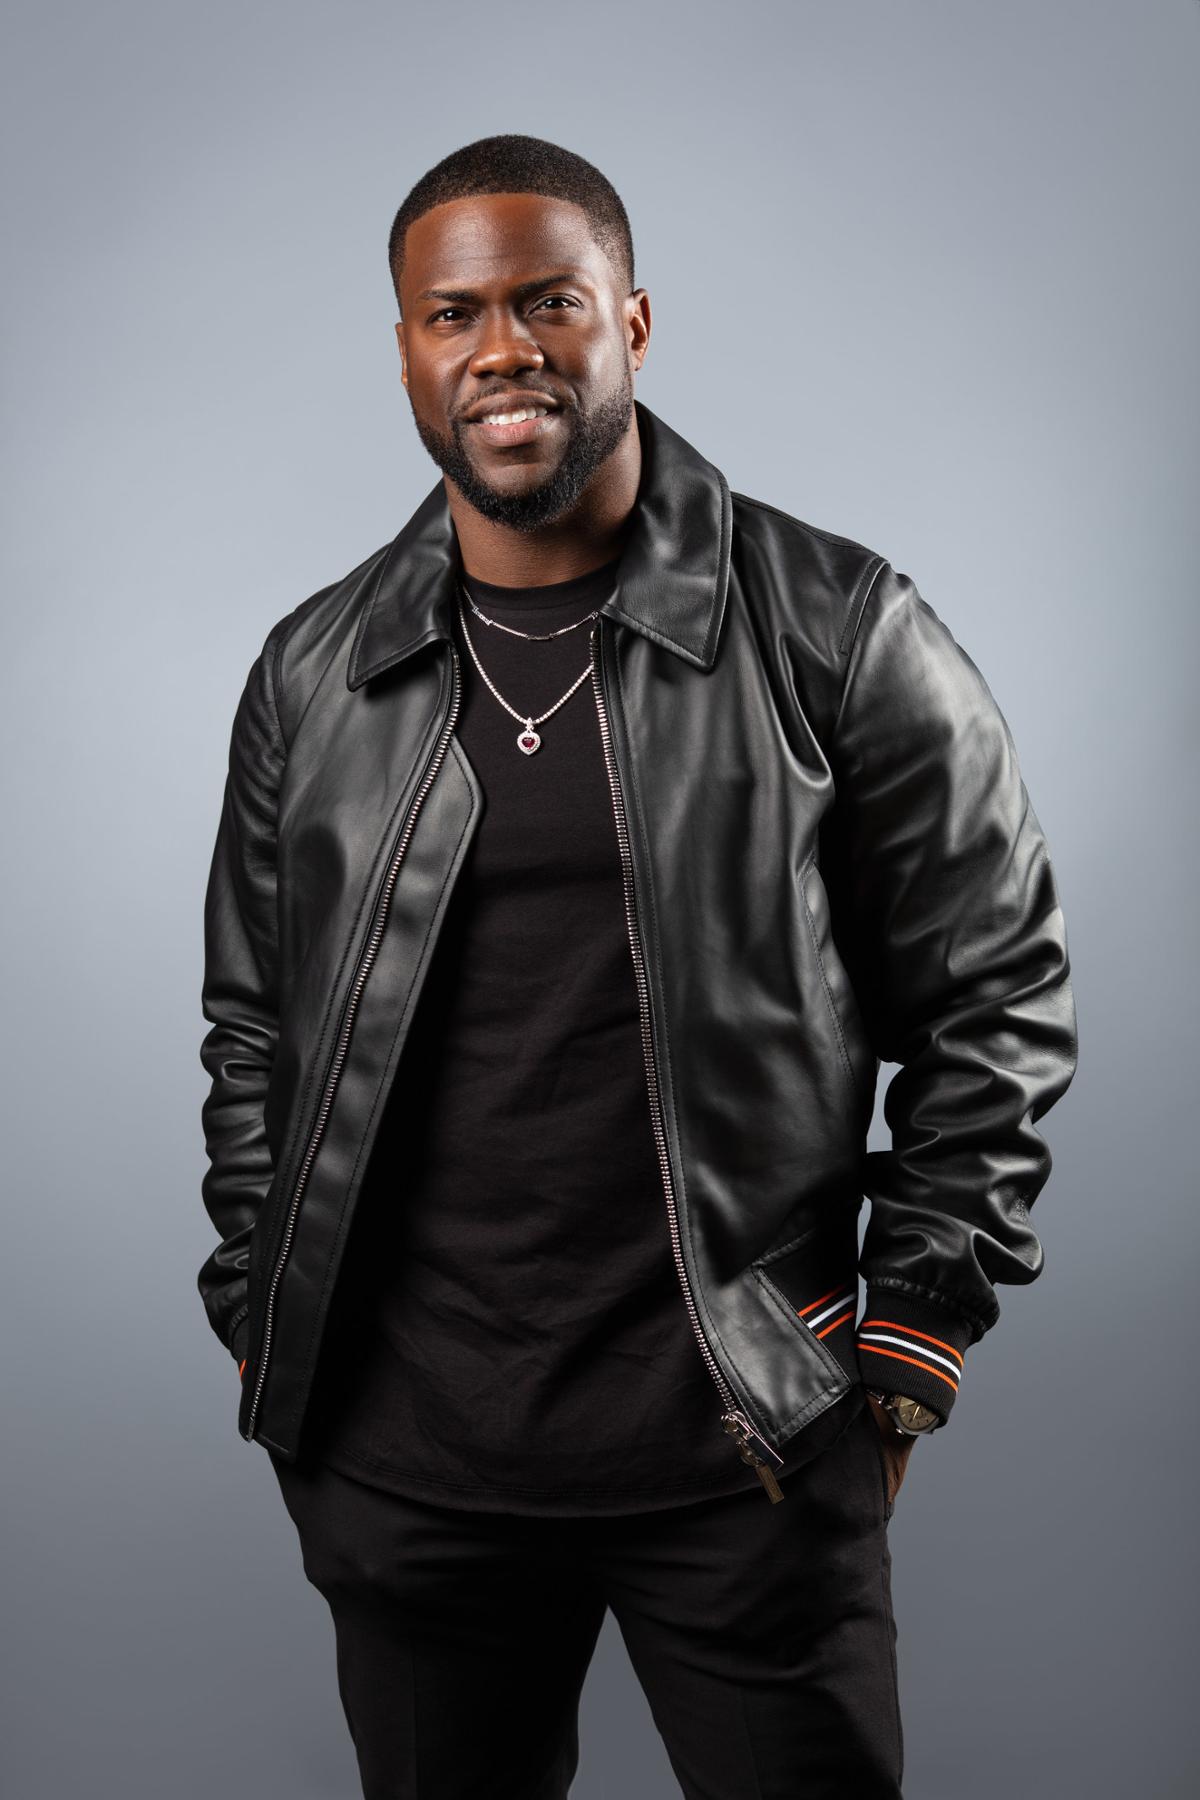 Actor and comedian Kevin Hart was an early backer of Hydrow and is also the company's creative director / Hydrow